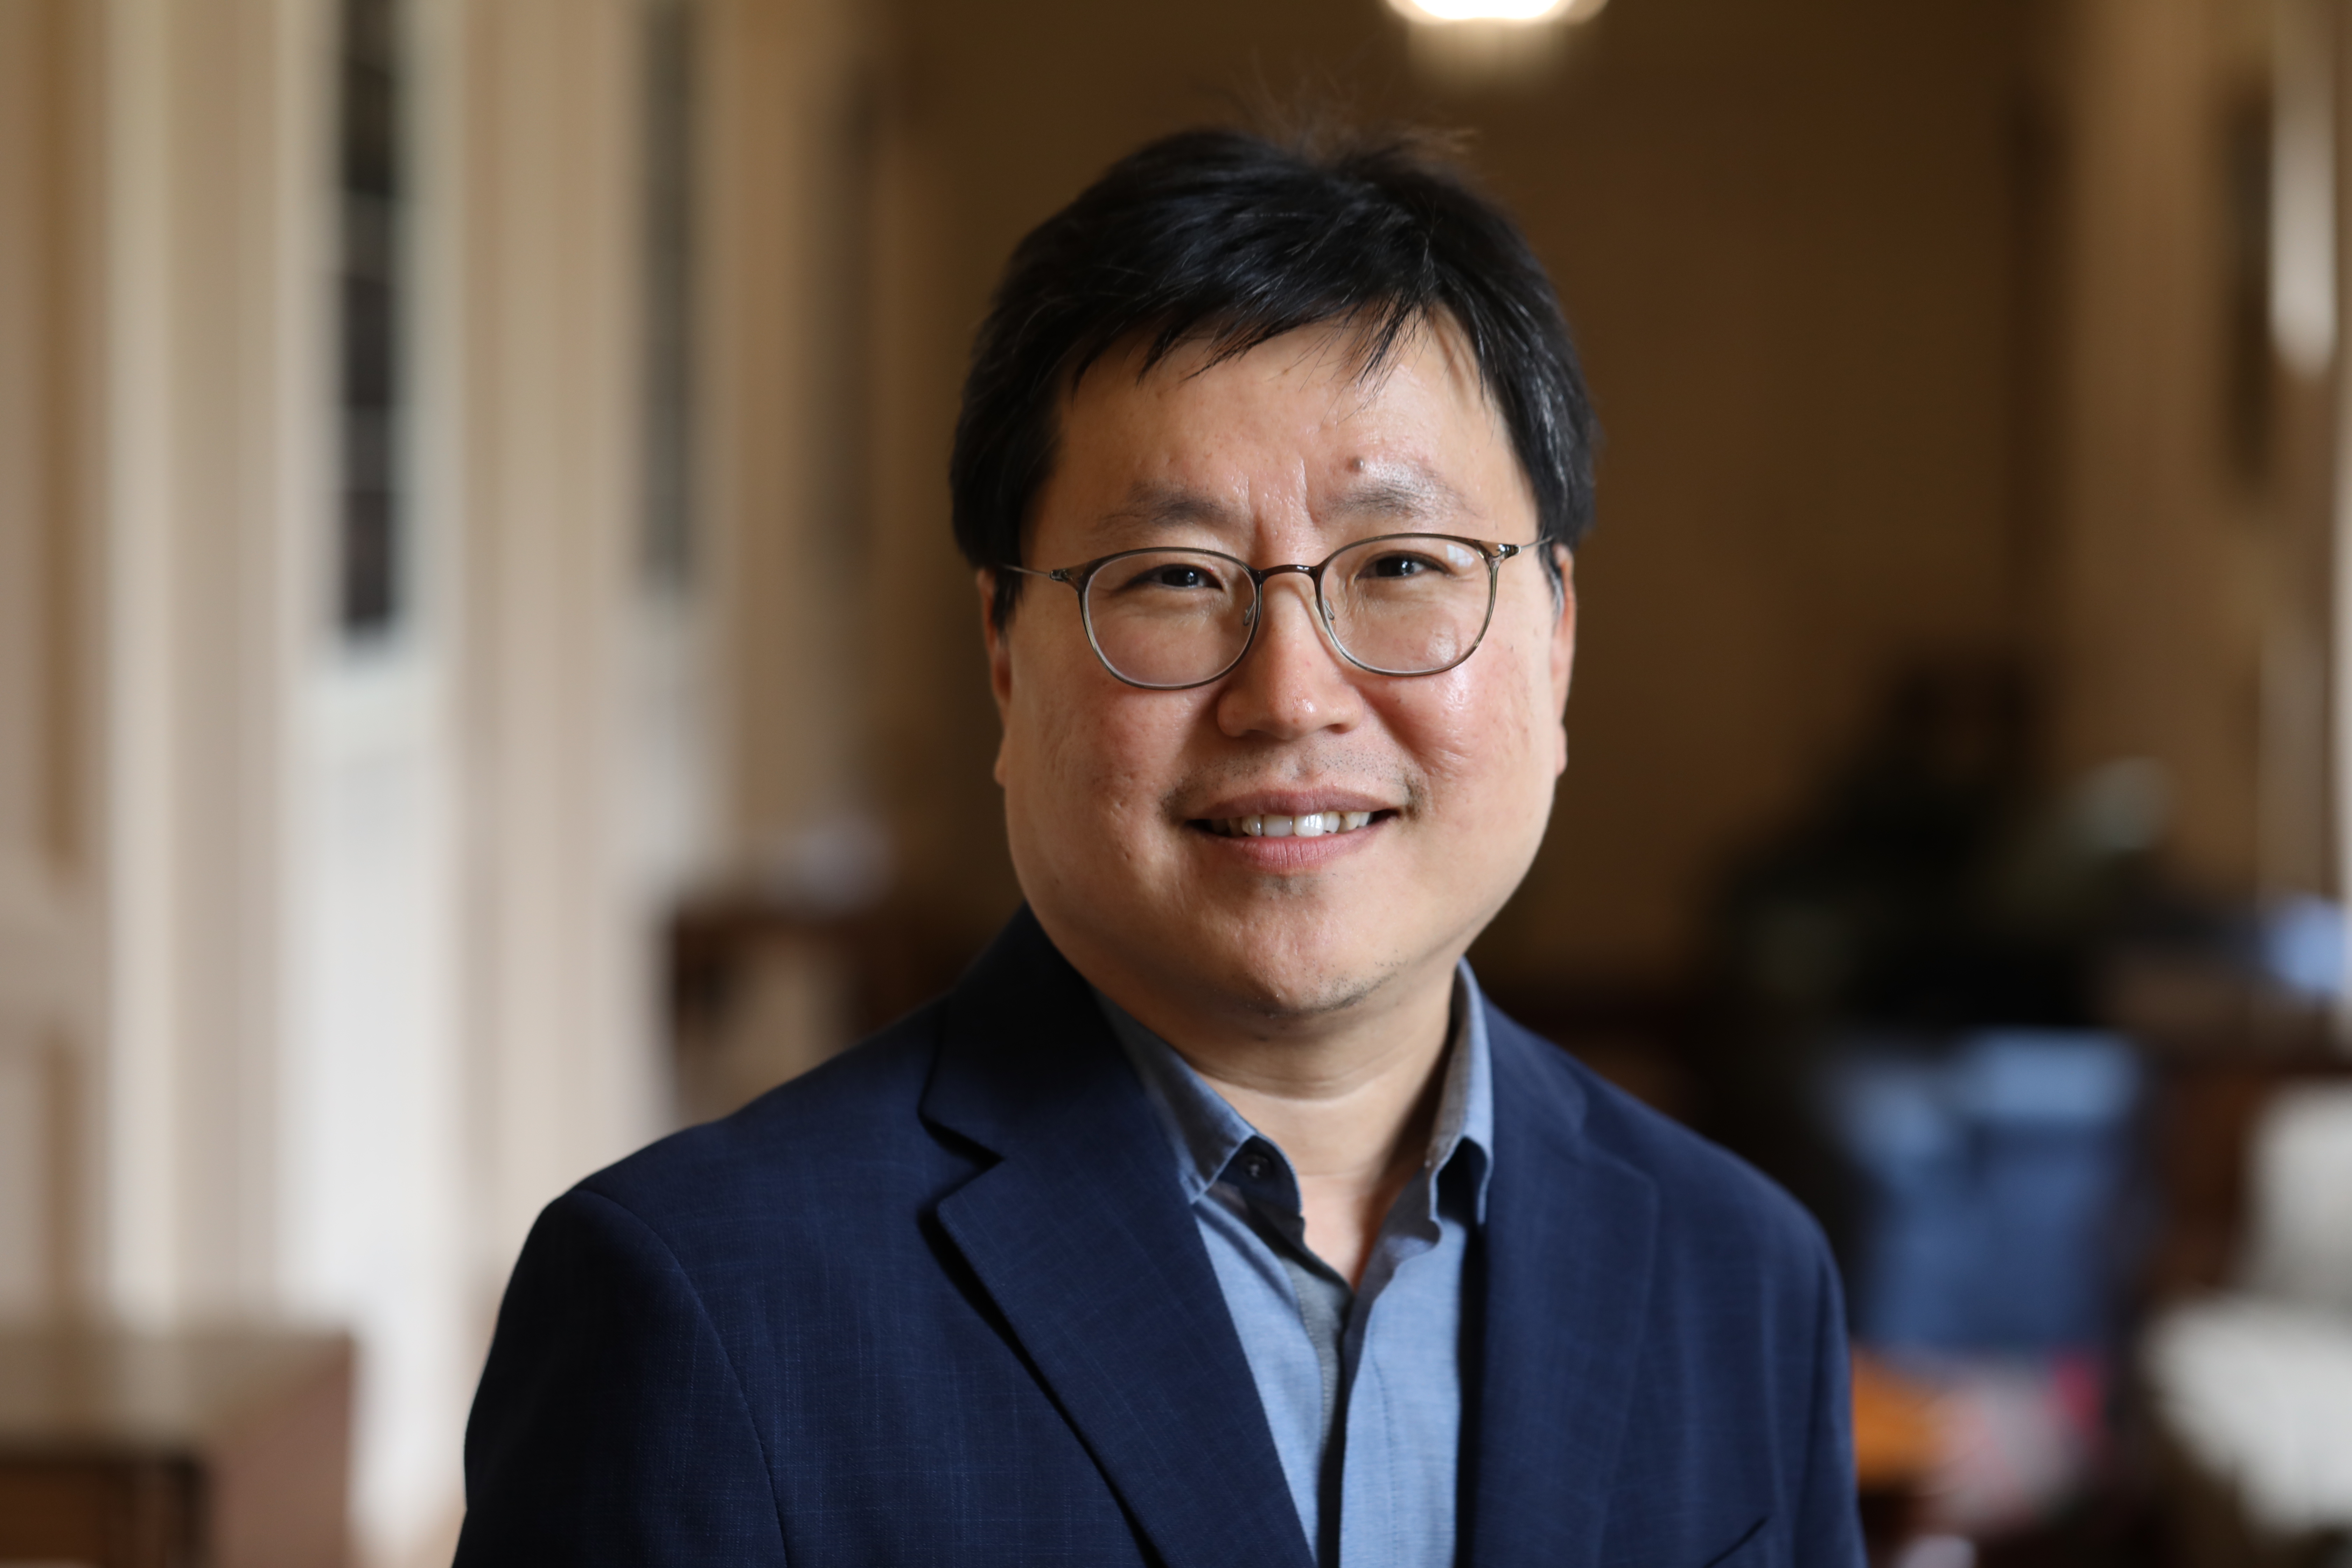 Fashion expert Jay Yoo, Ph.D., associate professor of apparel merchandising in the Robbins College of Health and Human Sciences at Baylor University